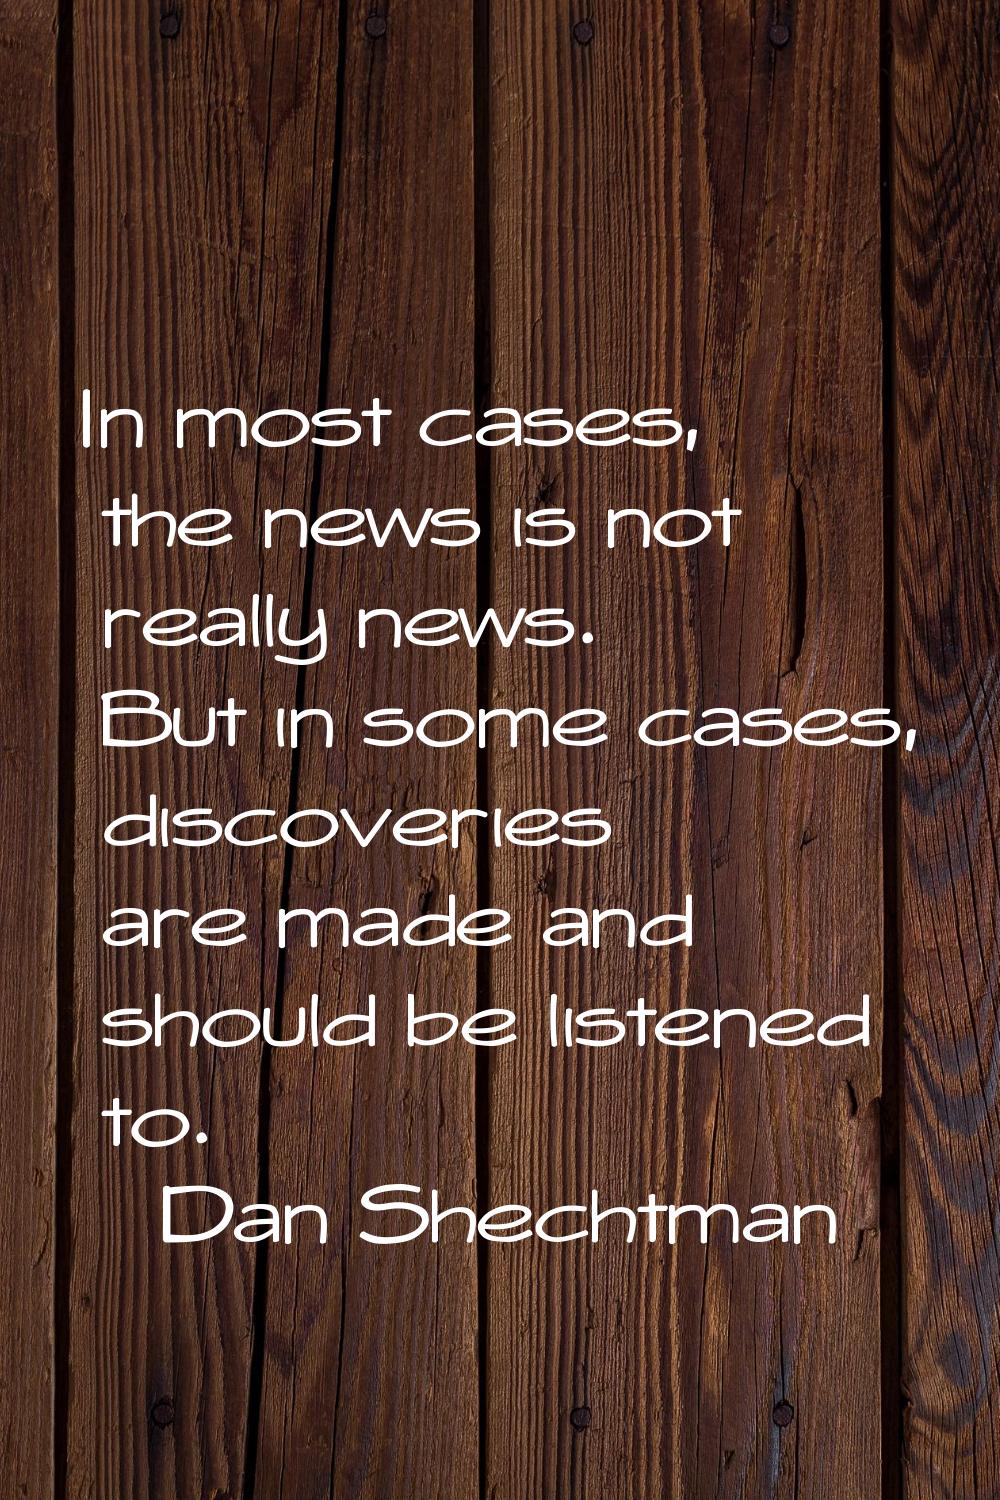 In most cases, the news is not really news. But in some cases, discoveries are made and should be l